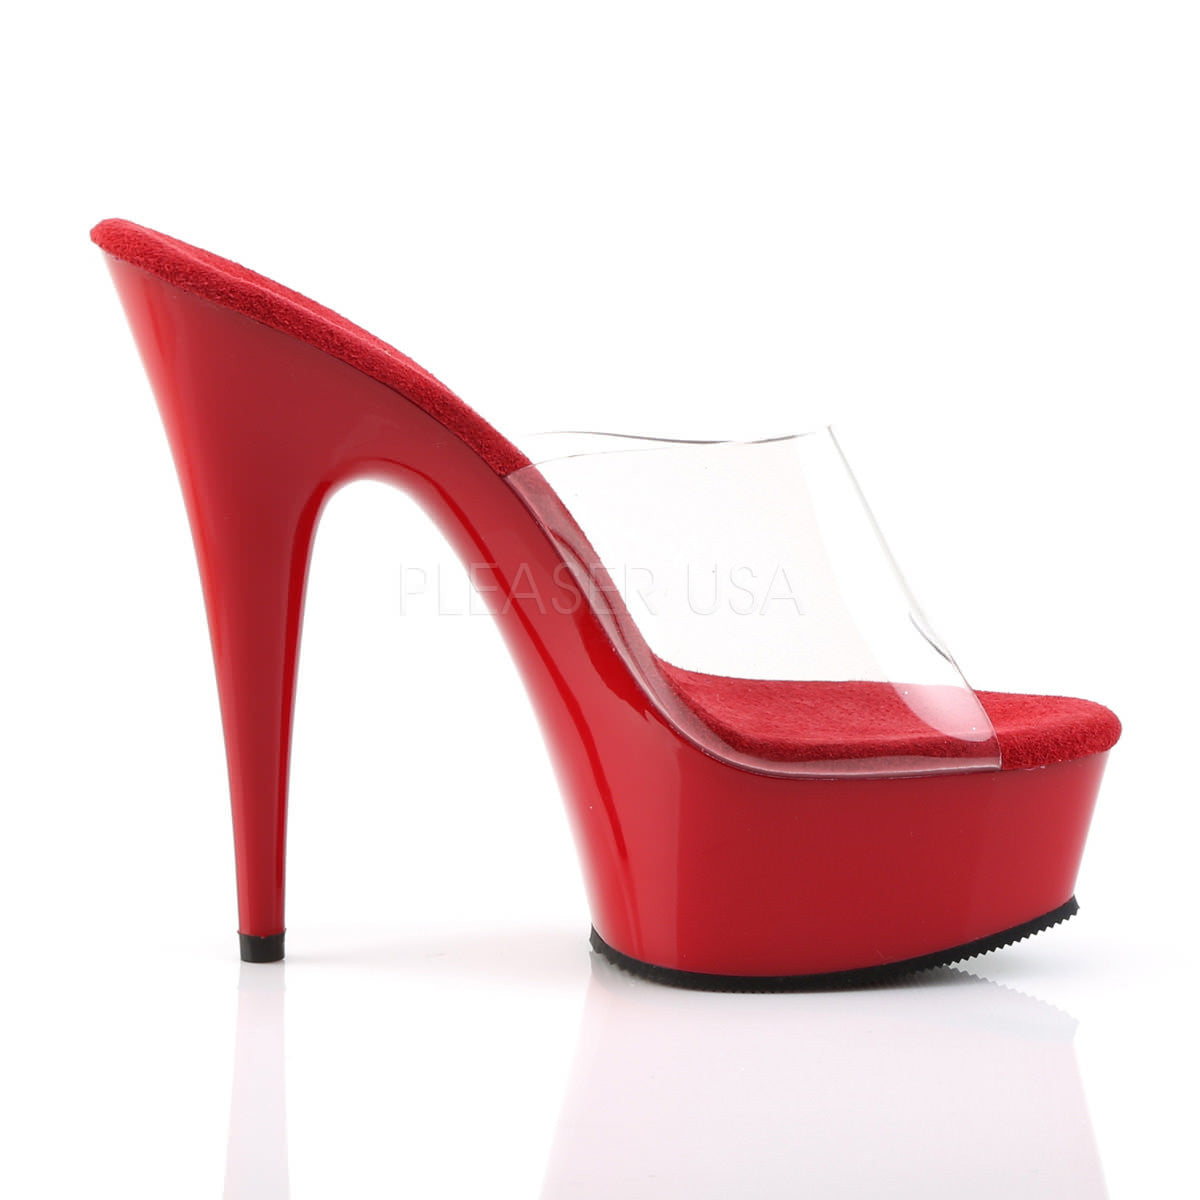 6 Inch Heel DELIGHT-601 Clear-Red